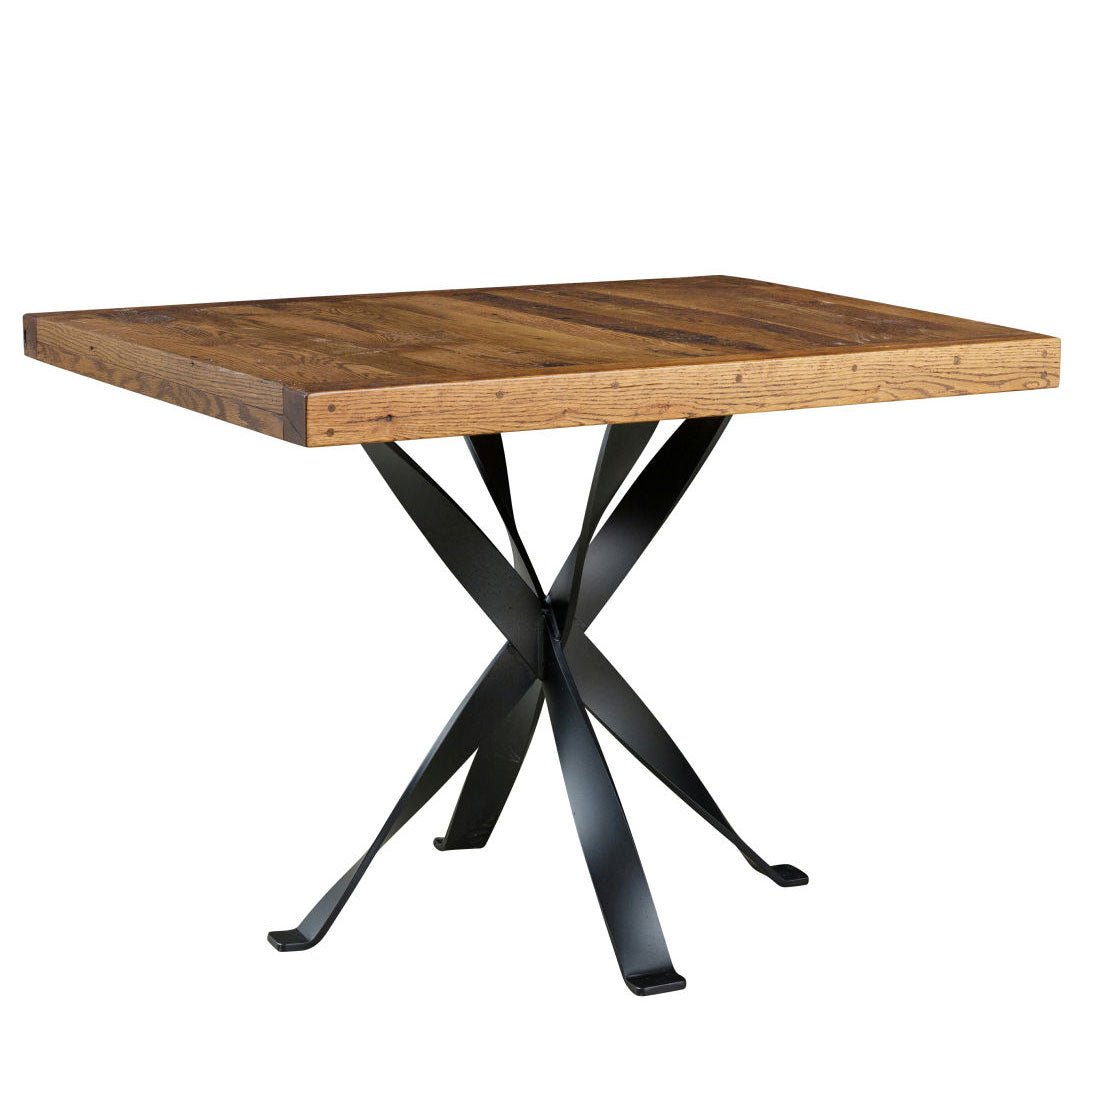 Chadd's Ford Table - snyders.furniture